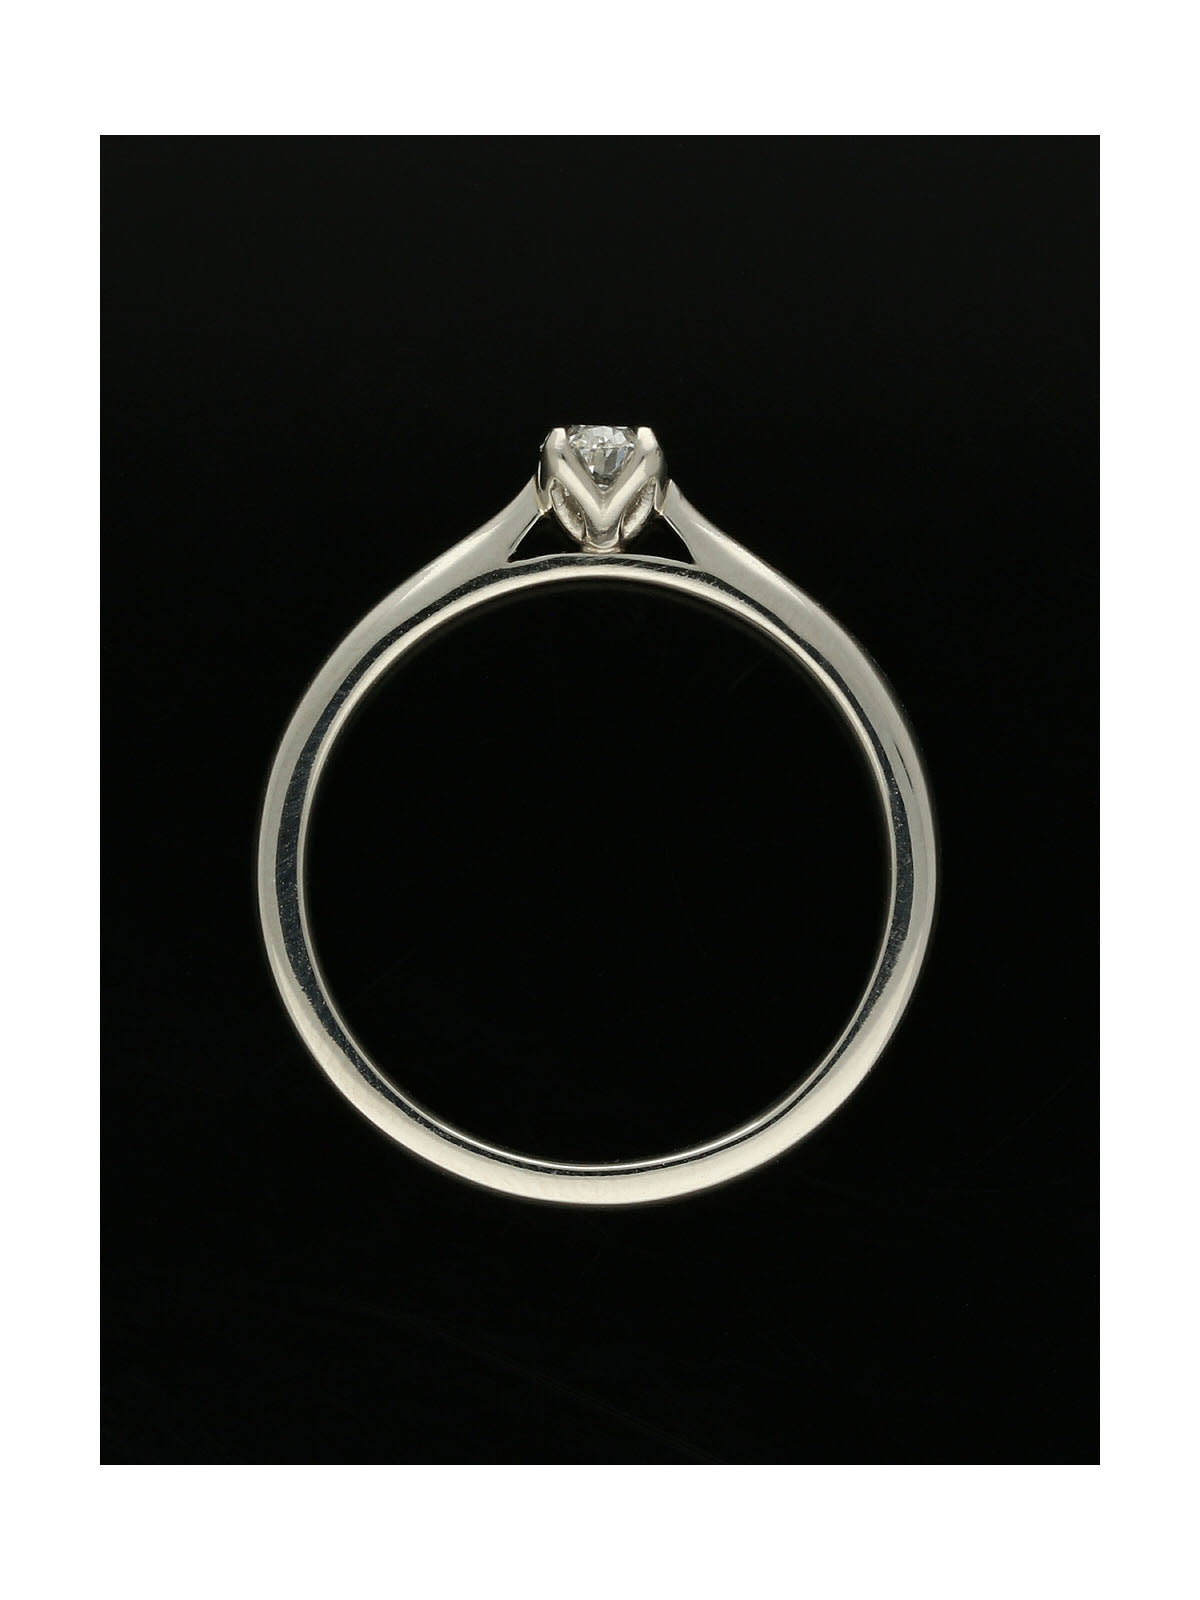 Diamond Solitaire Engagement Ring 0.25ct Oval Cut in Platinum